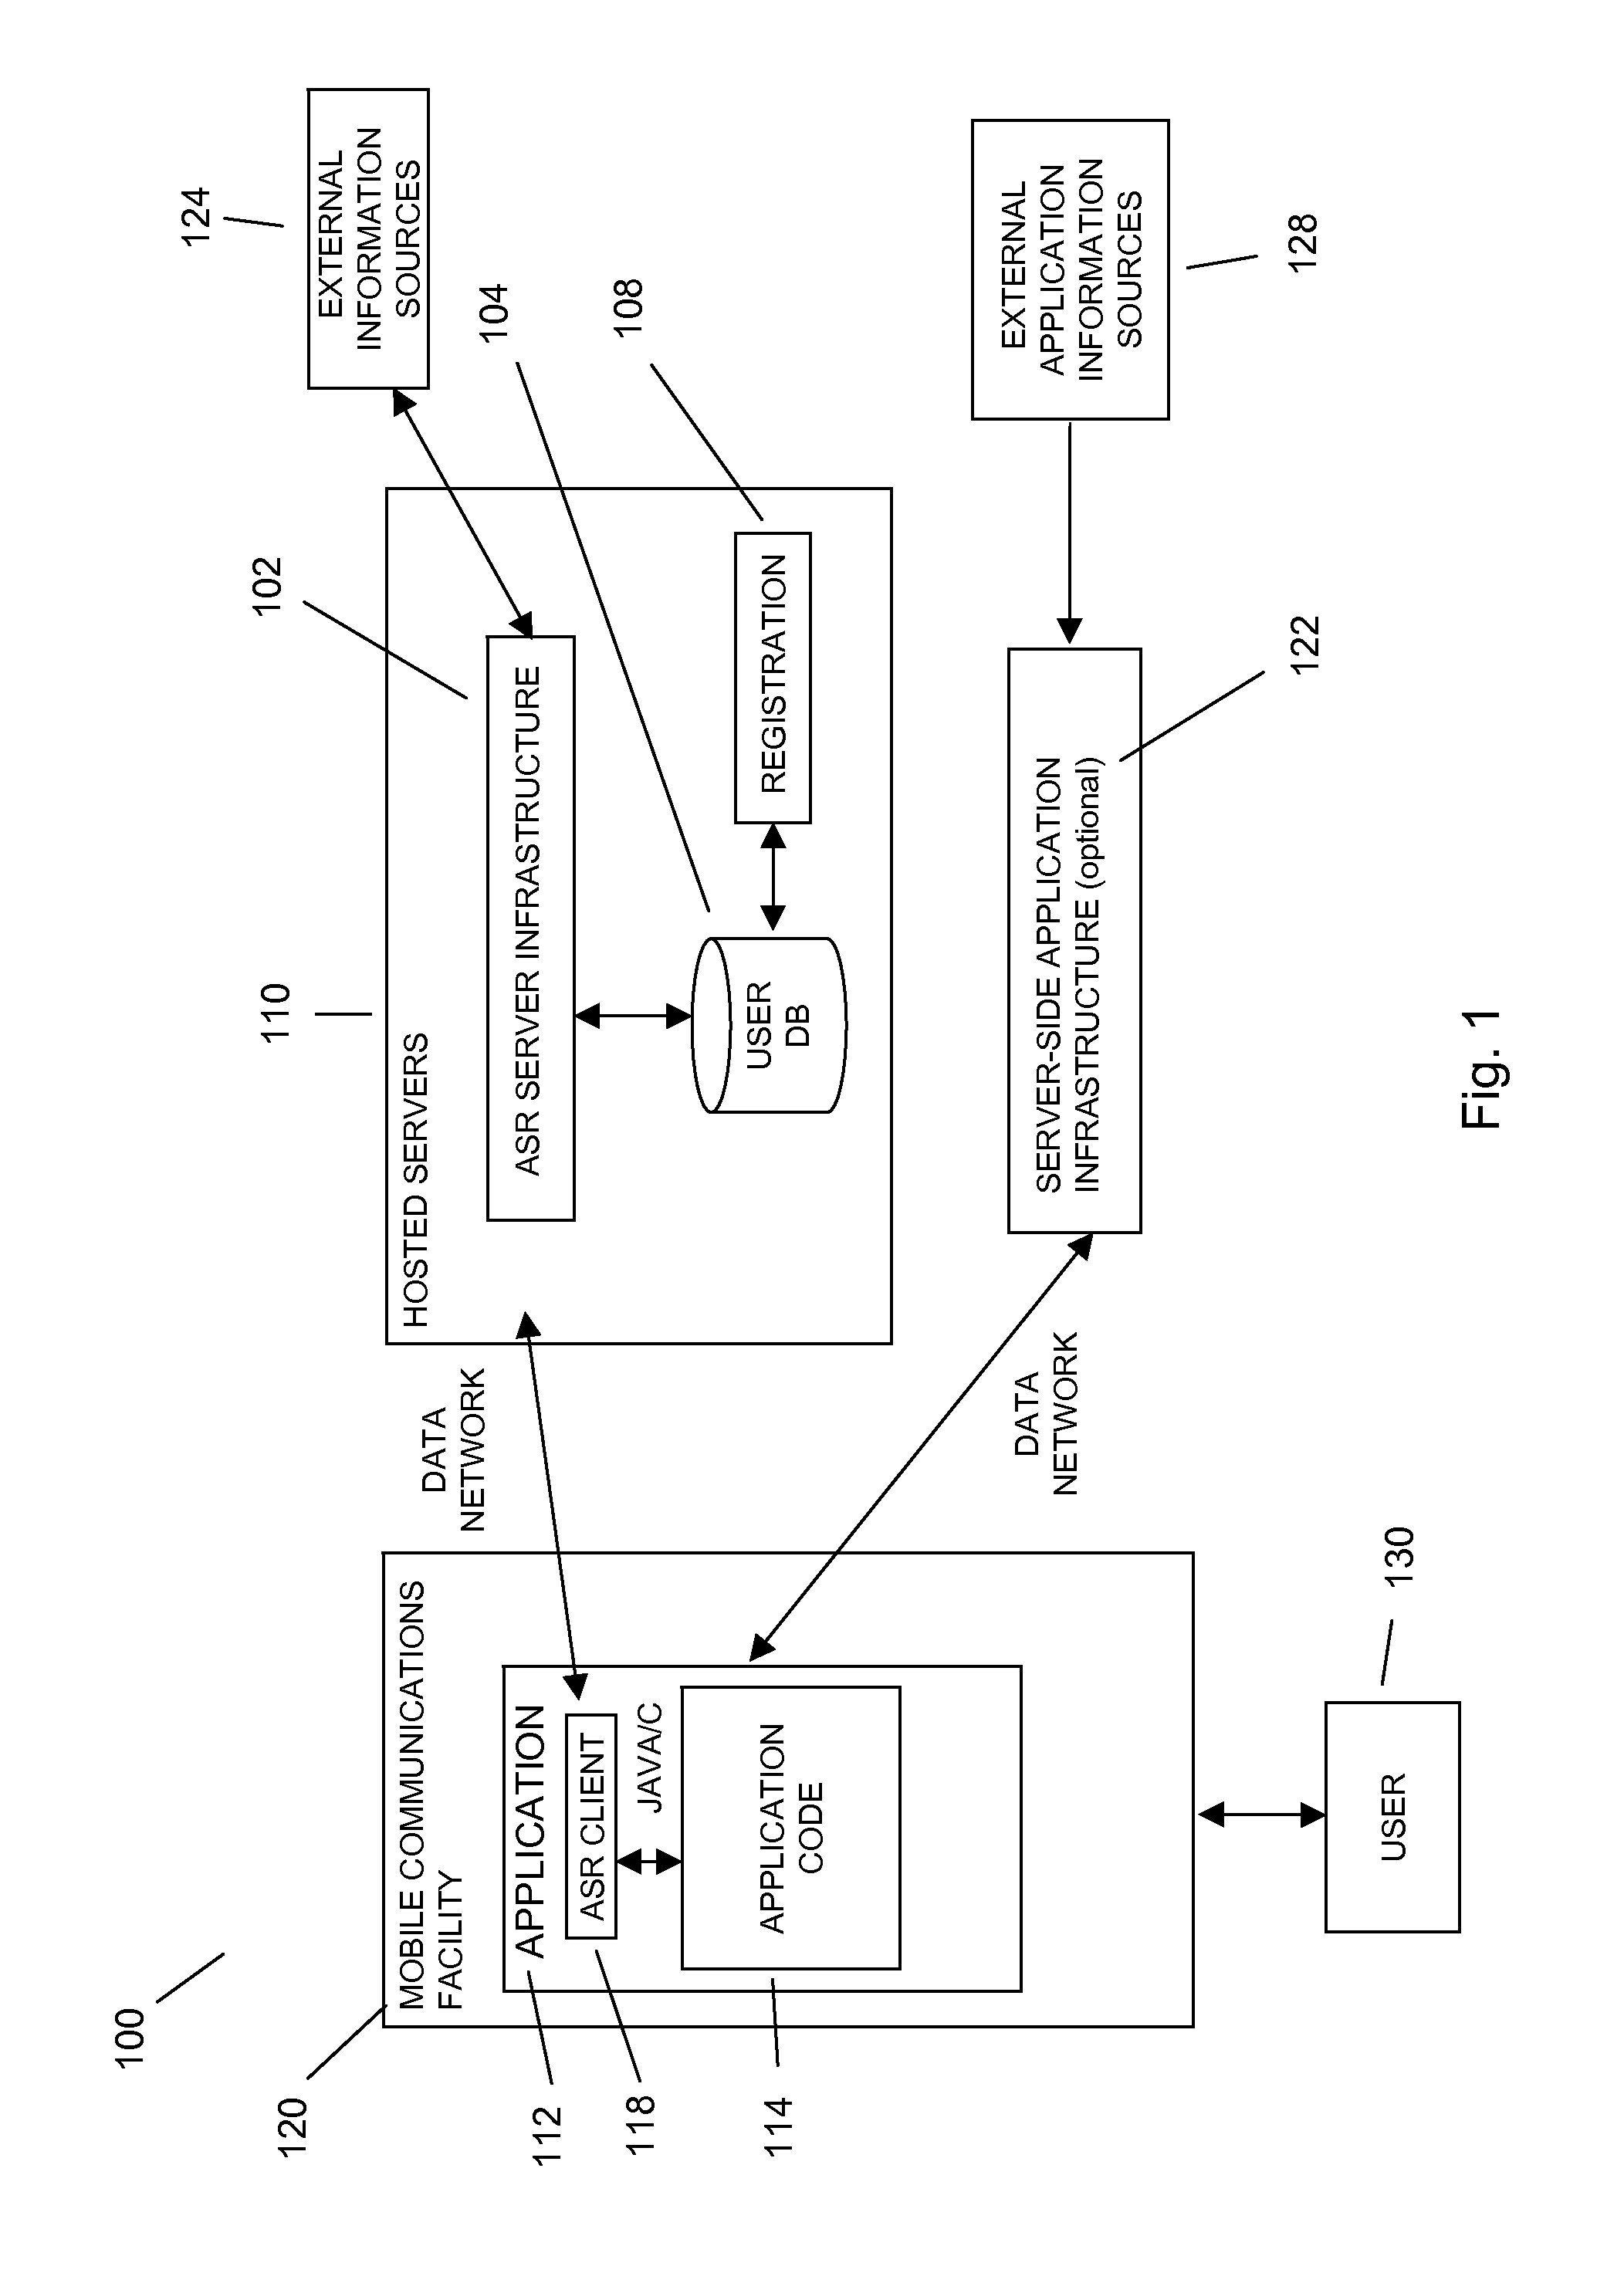 Command and control utilizing content information in a mobile voice-to-speech application